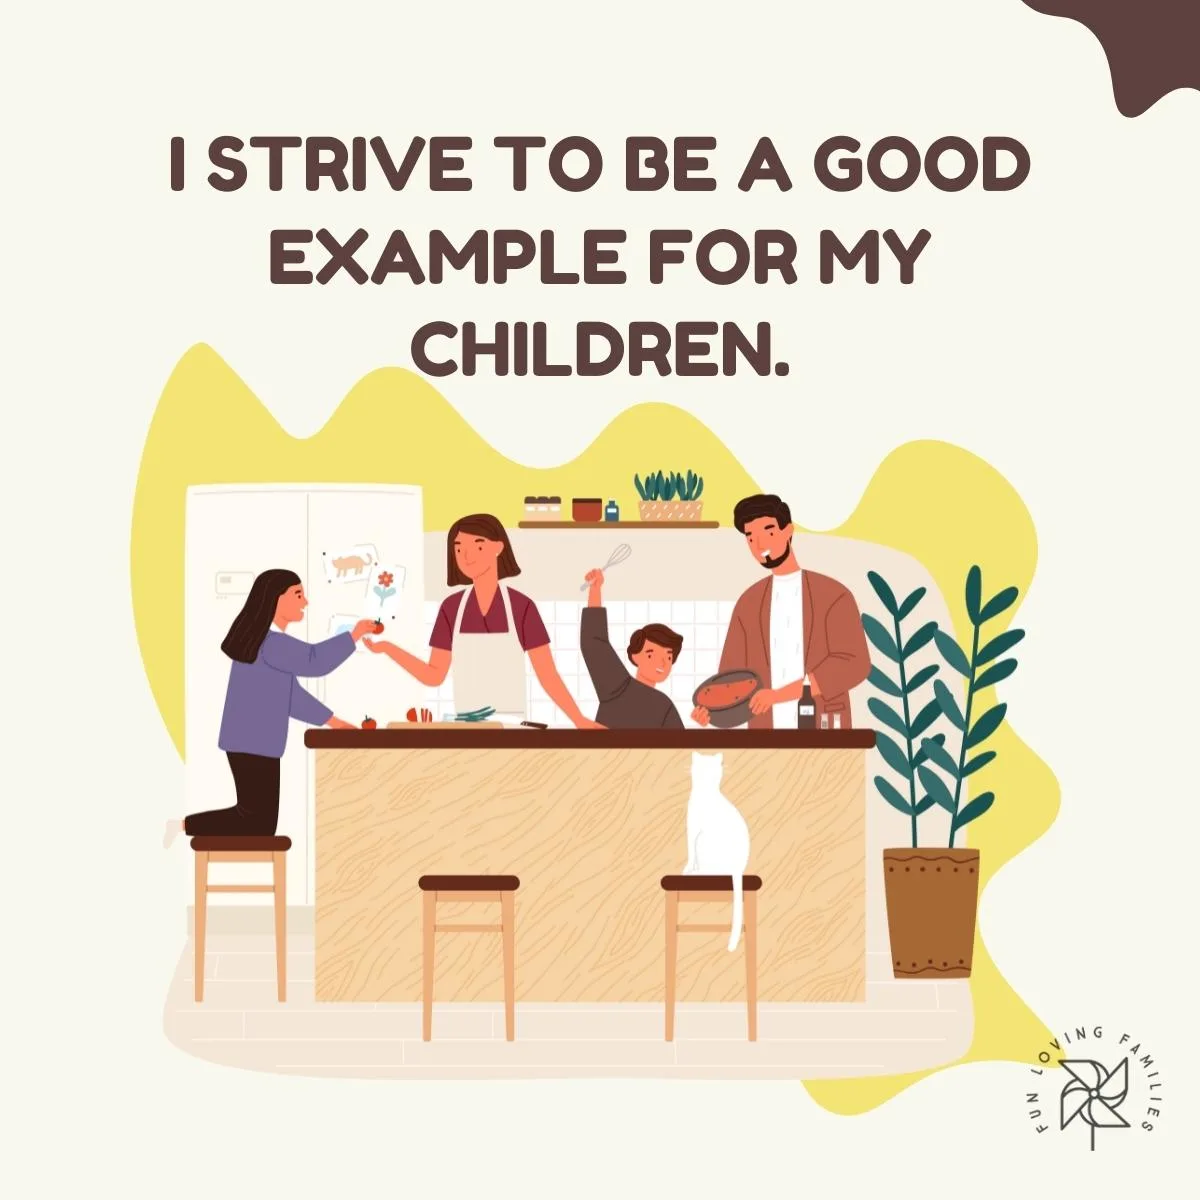 I strive to be a good example for my children affirmation